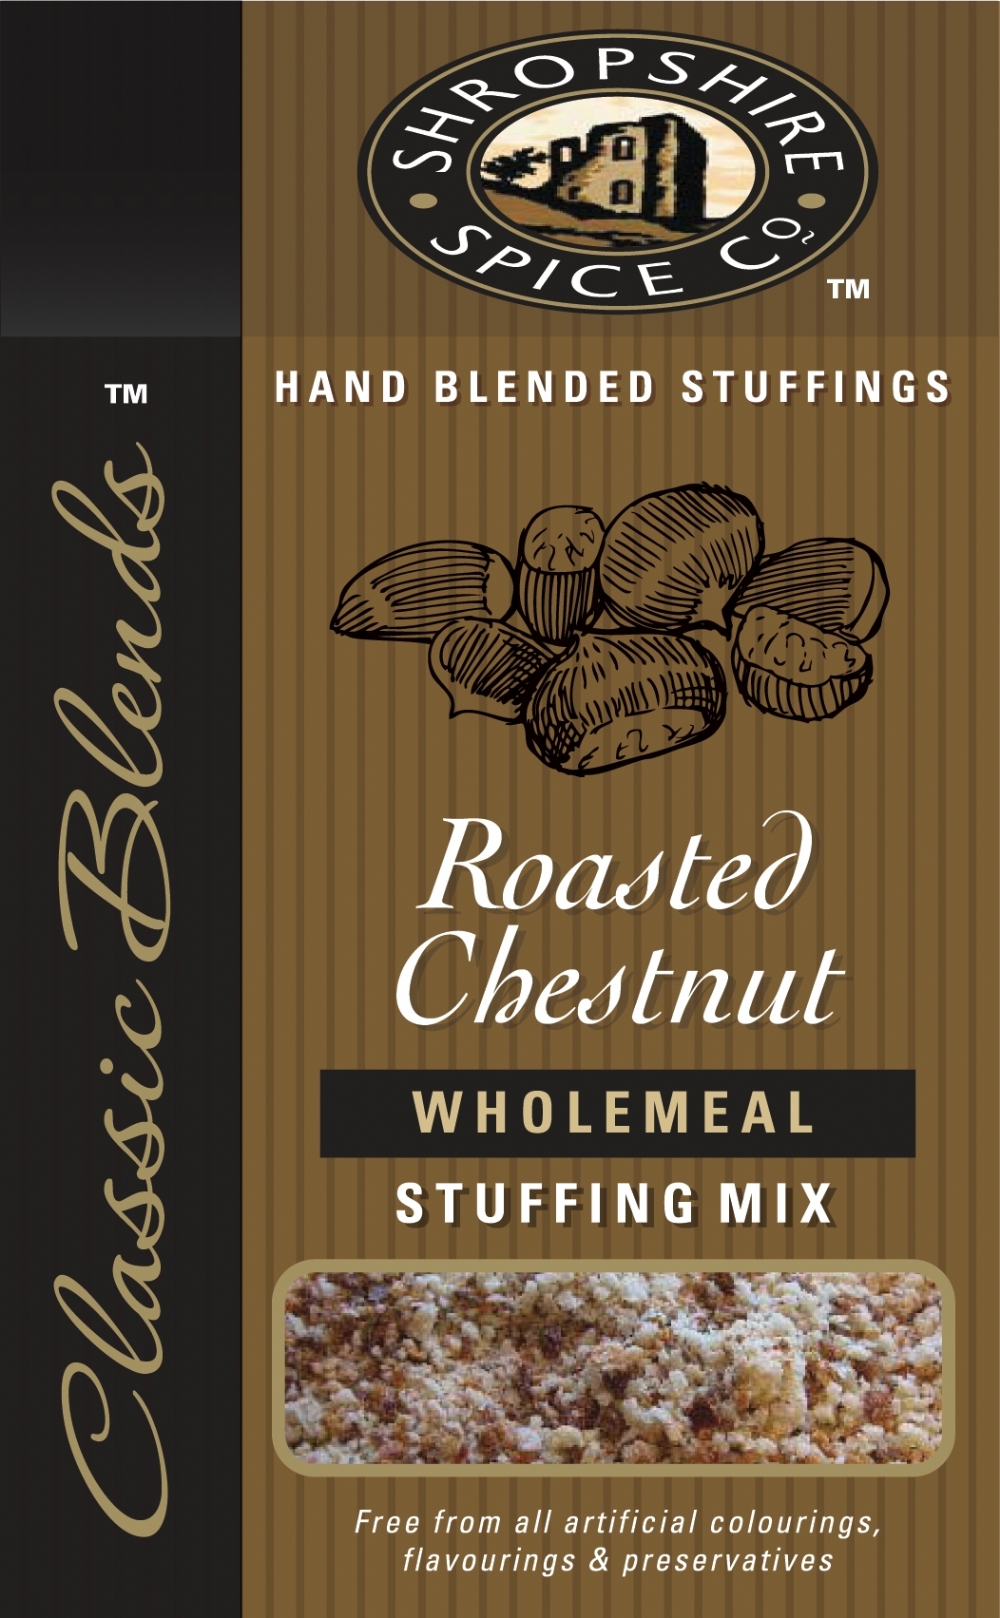 SHROP. SPICE Roasted Chestnut W/Meal Stuffing Mix 150g